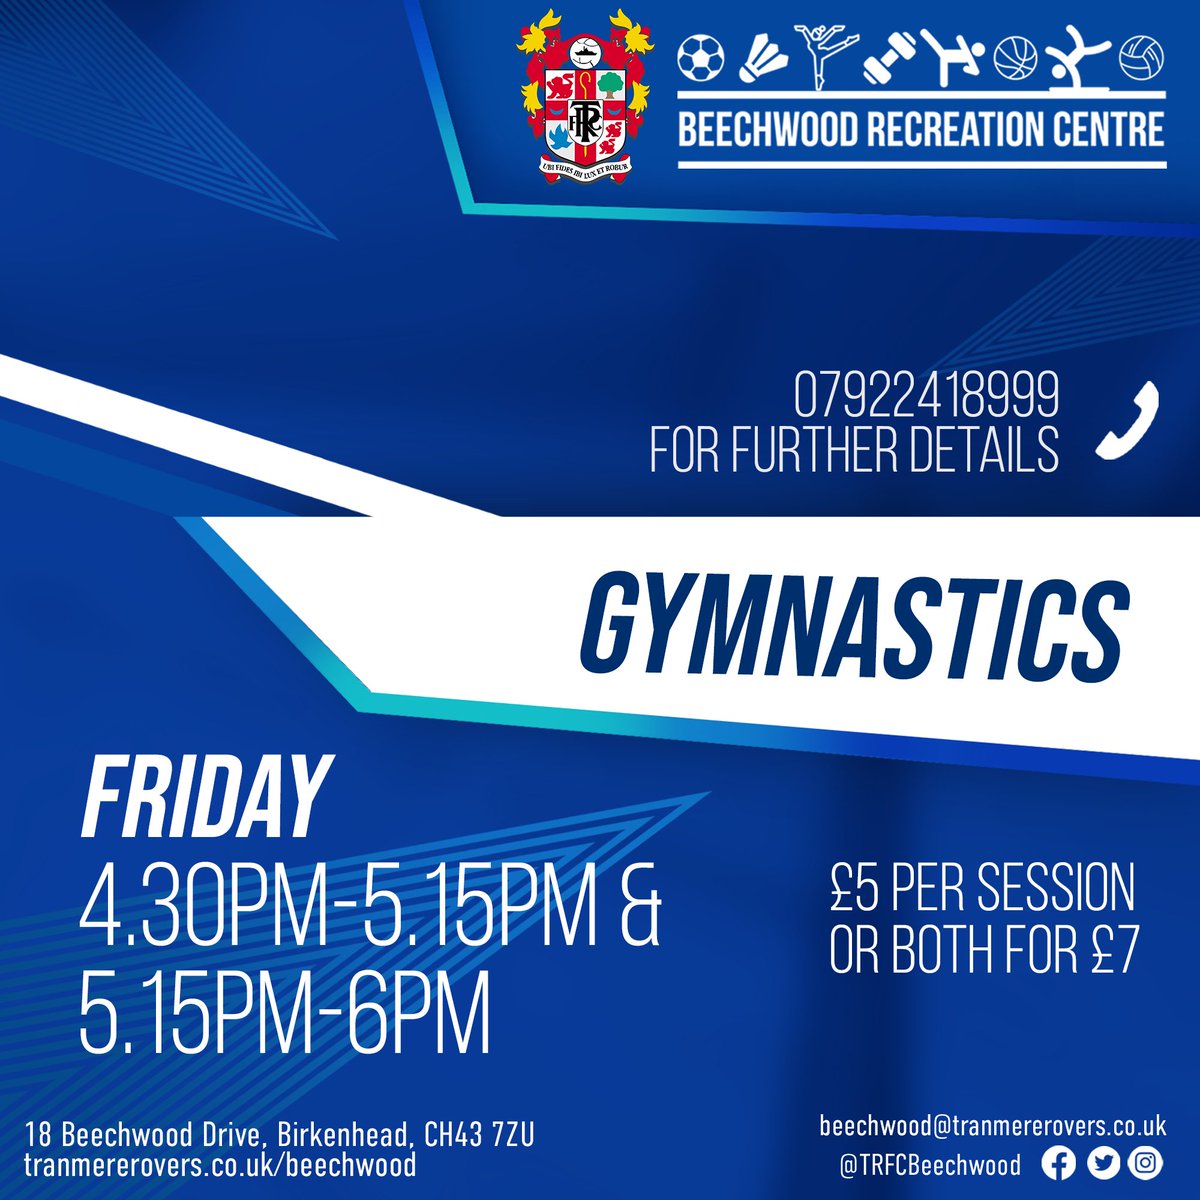 🤸‍♀️ Come along to Gymnastics at Beechwood every Friday! Here are all the details - message the phone number shown for any further info. #TRFC #SWA